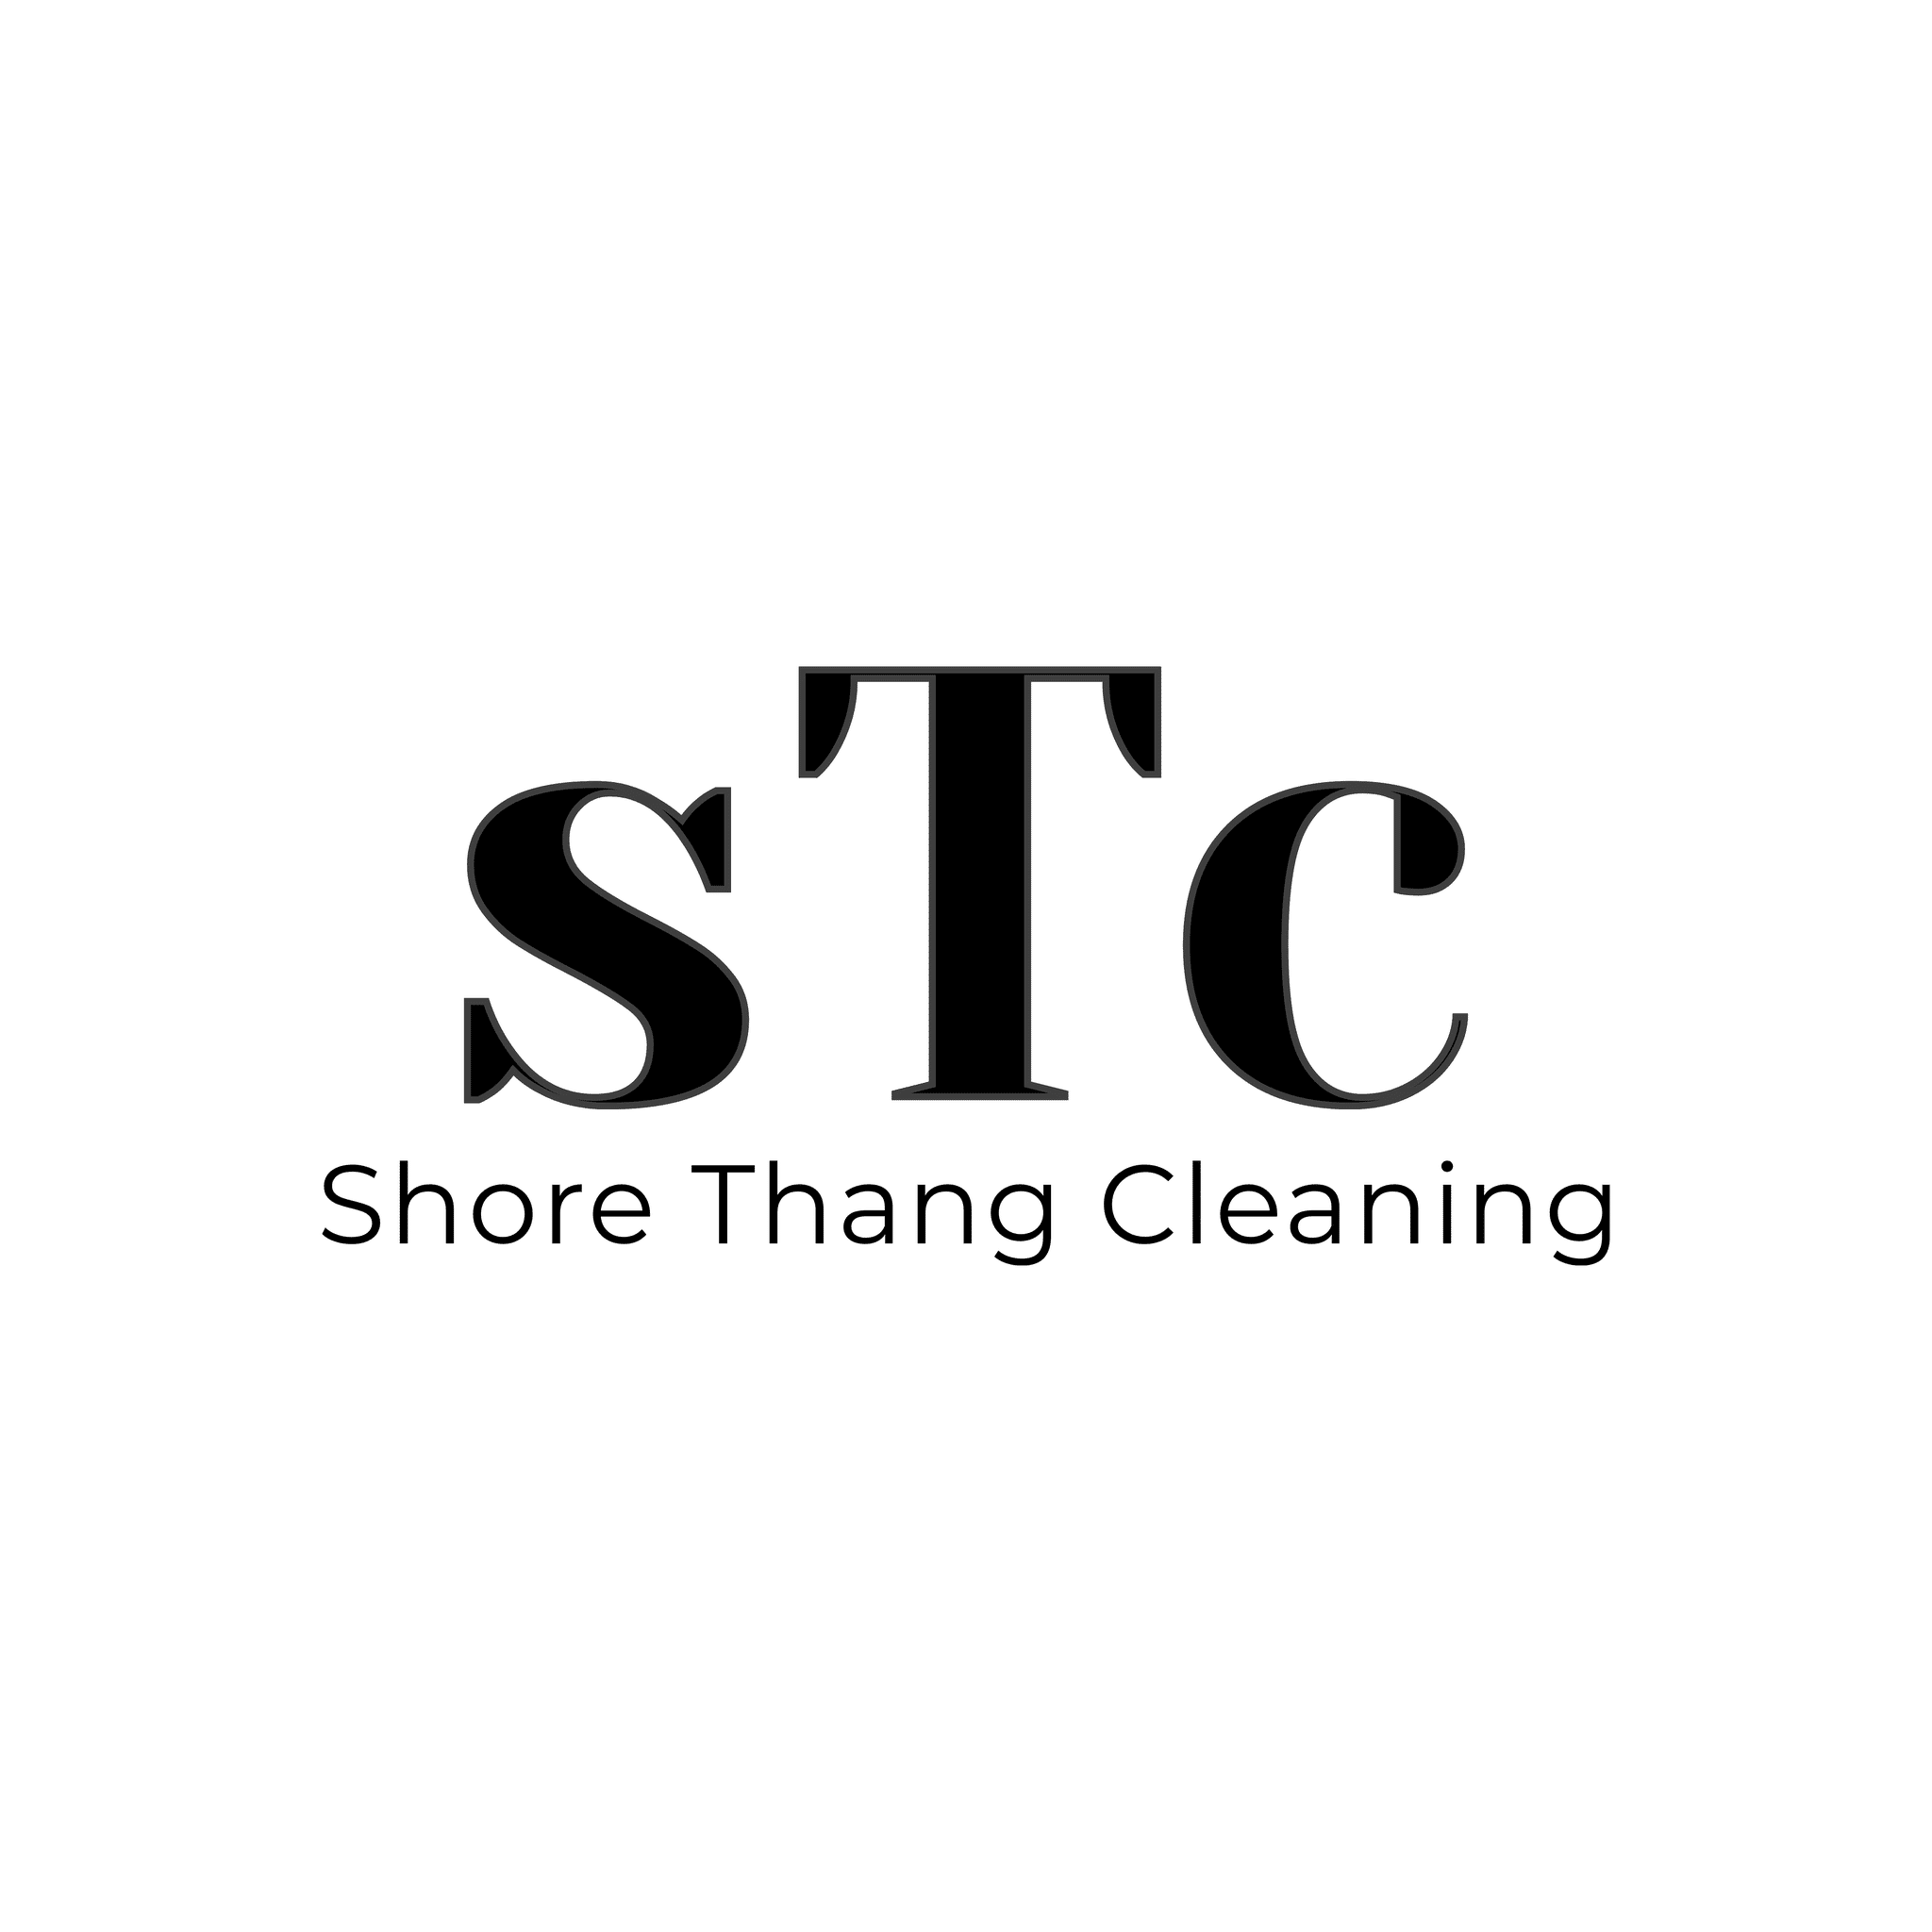 Shore Thang Cleaning